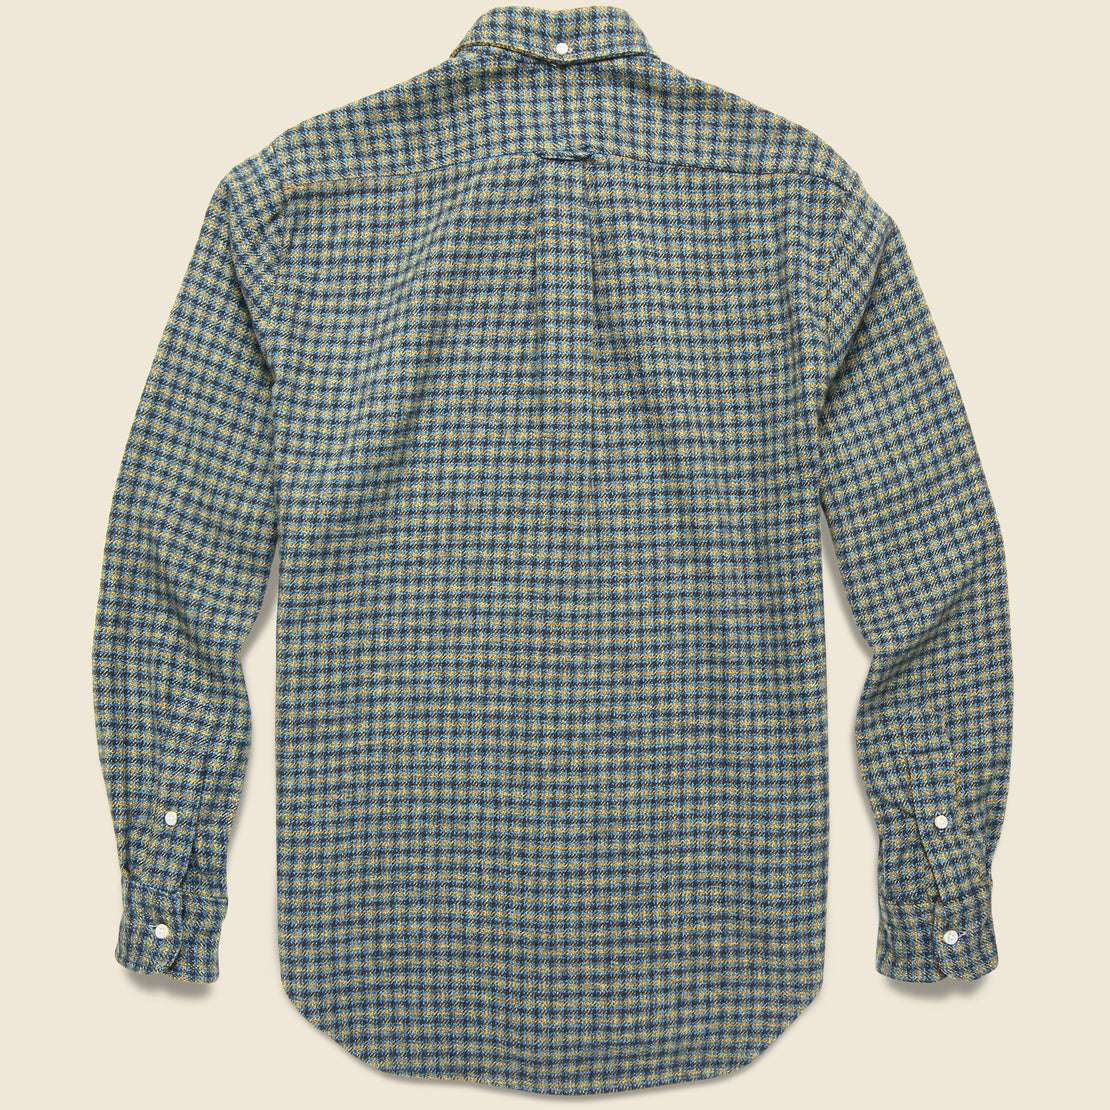 Winter Cotton Tweed Check Shirt - Blue/Yellow - Gitman Vintage - STAG Provisions - Tops - L/S Woven - Plaid